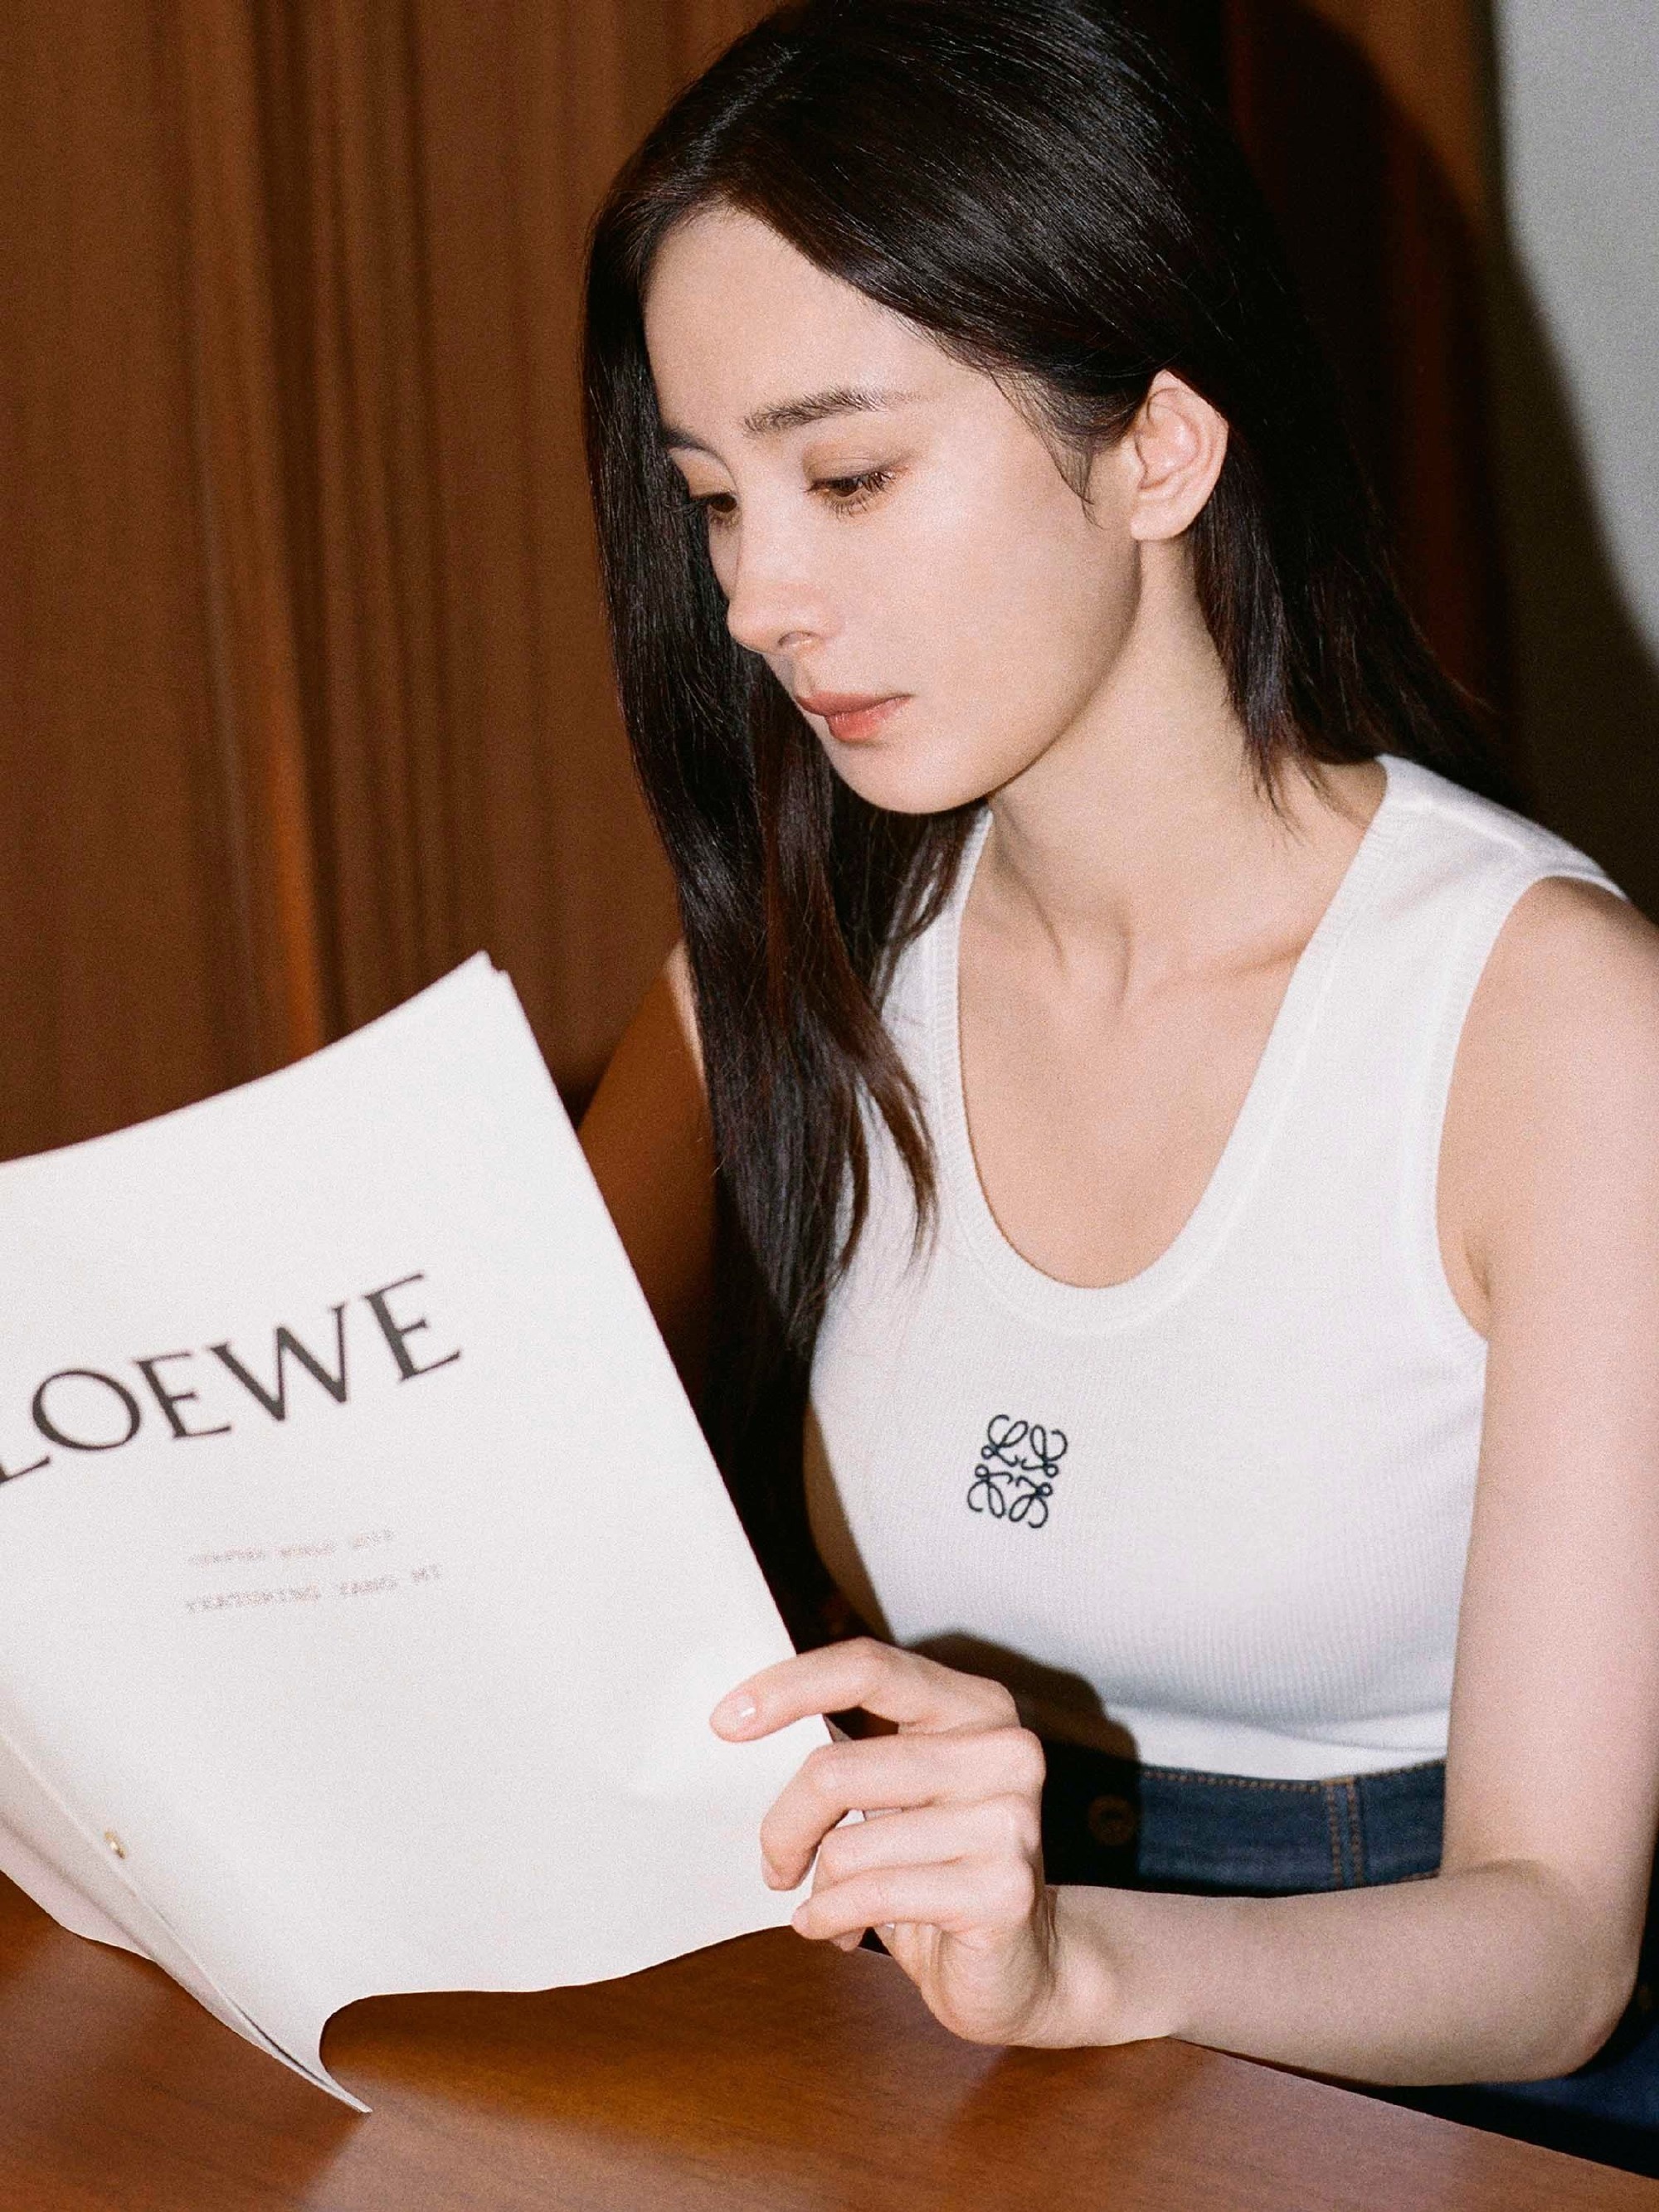 The campaign videos offer a glimpse into Yang's participation in the Crafted World Quiz. Photo: Loewe